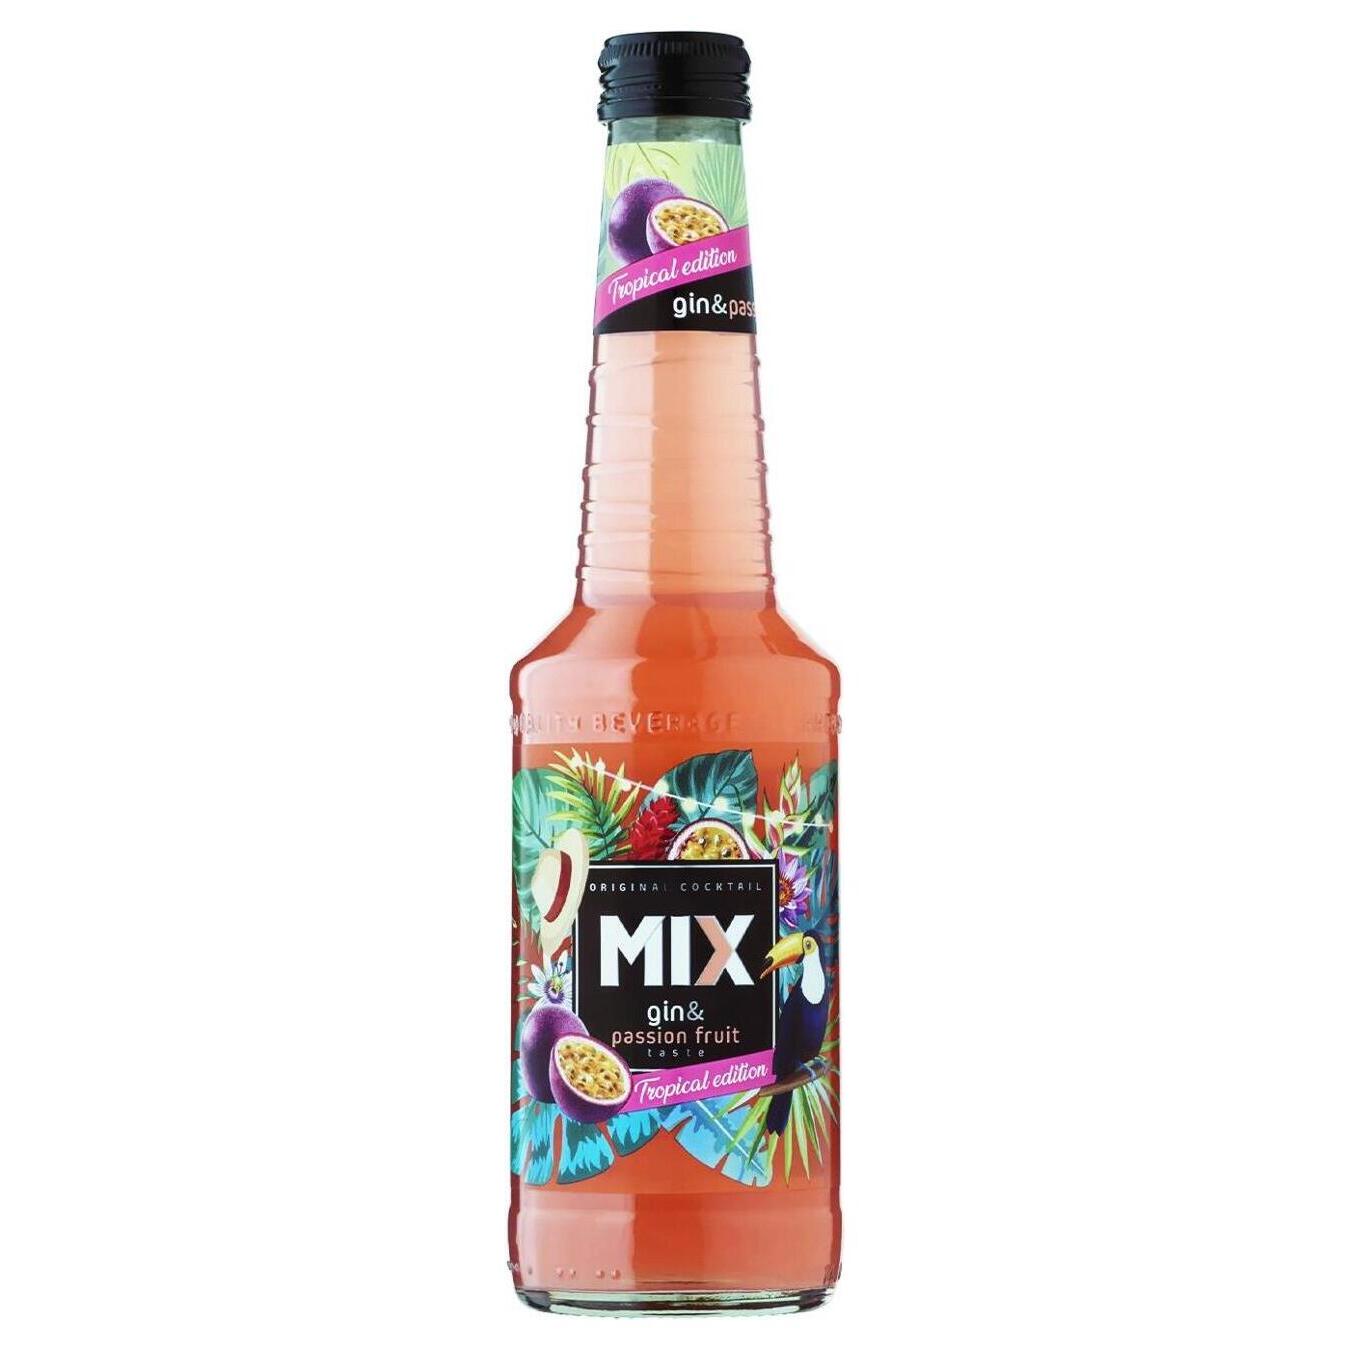 Low-alcohol drink MIX gin passion fruit 4% 0.33l glass